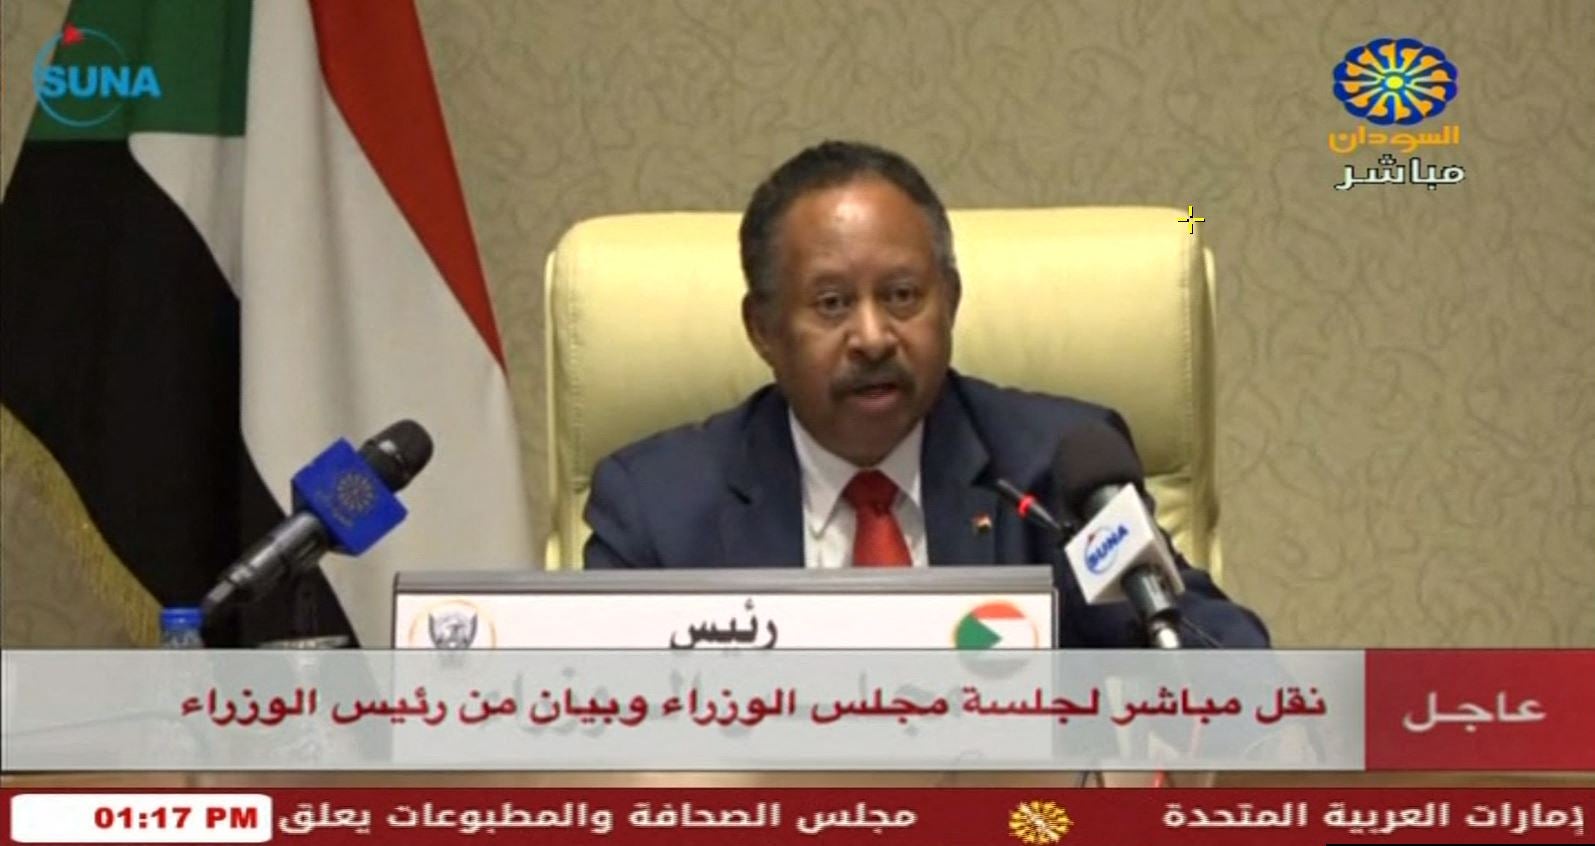 Prime Minister Abdalla Hamdok addressing the cabinet meeting broadcast on state-run TV